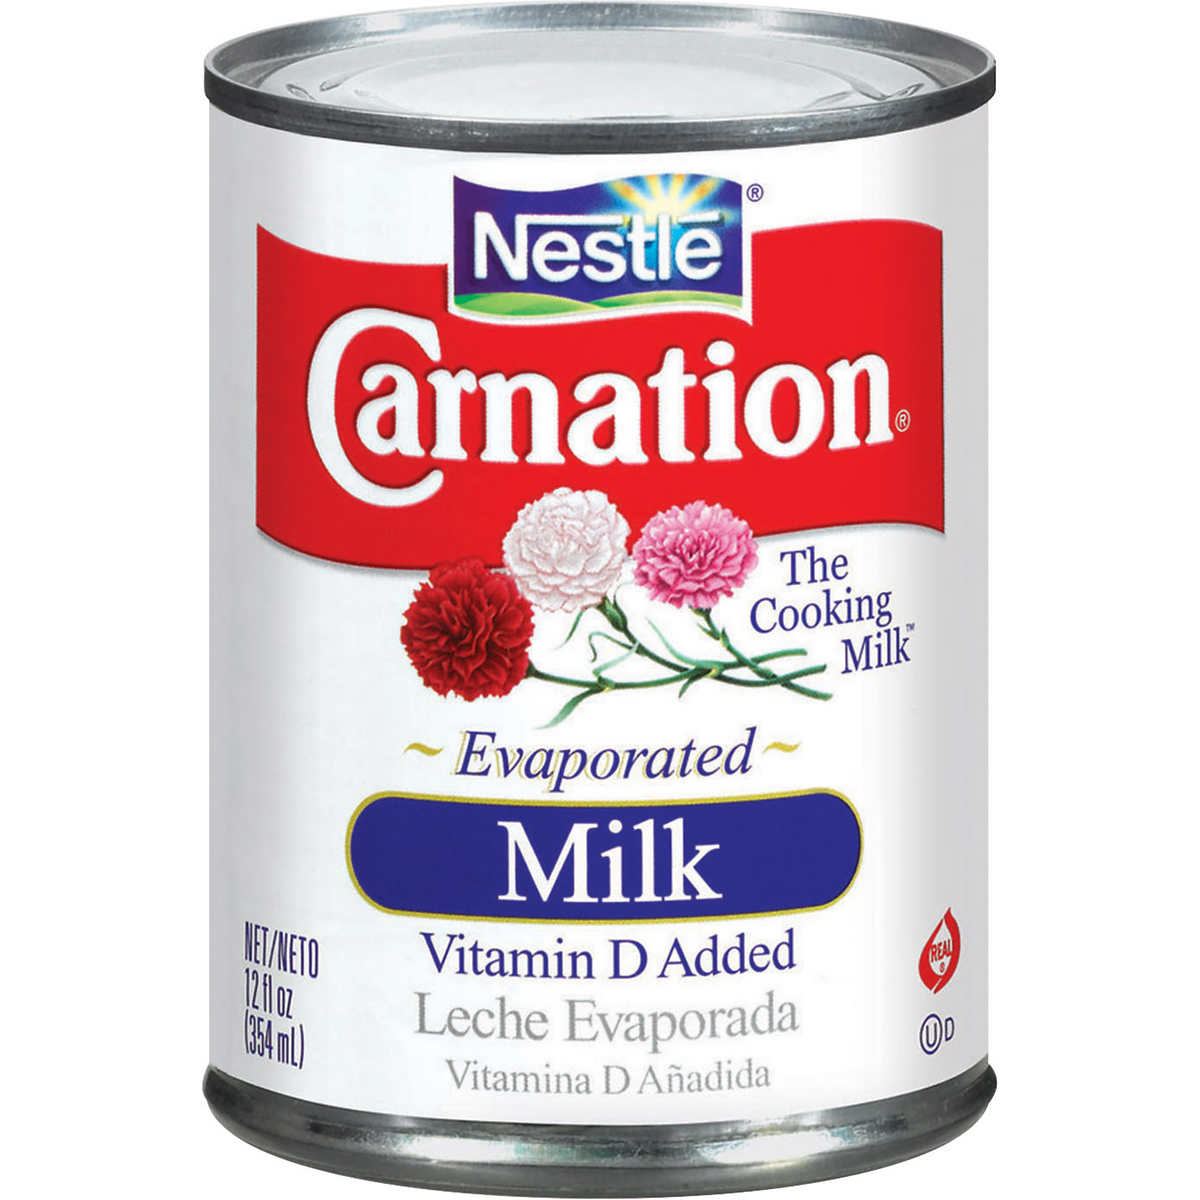 Carnation Evaporated Milk Cans 12 fl.oz, 12 Count